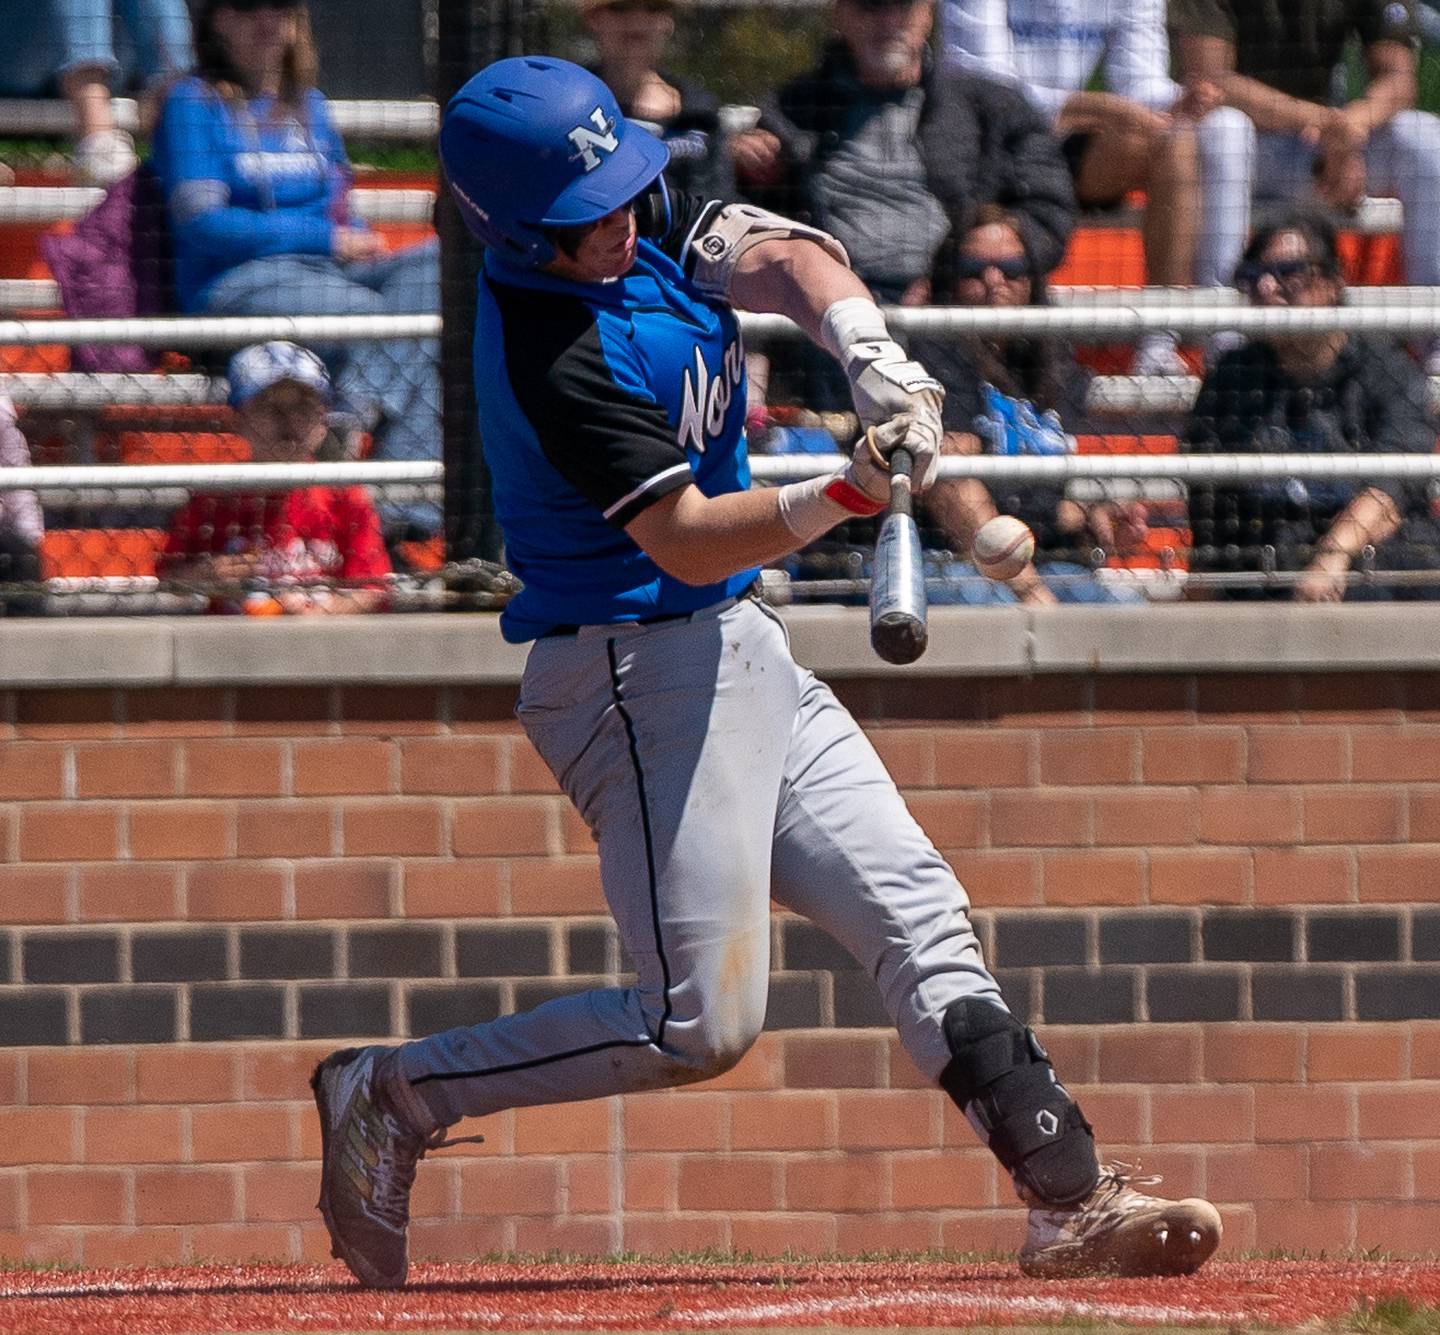 St. Charles North's Jayden Lobliner (4) singles against St. Charles East during a baseball game at St. Charles East High School on Saturday, May 7, 2022.